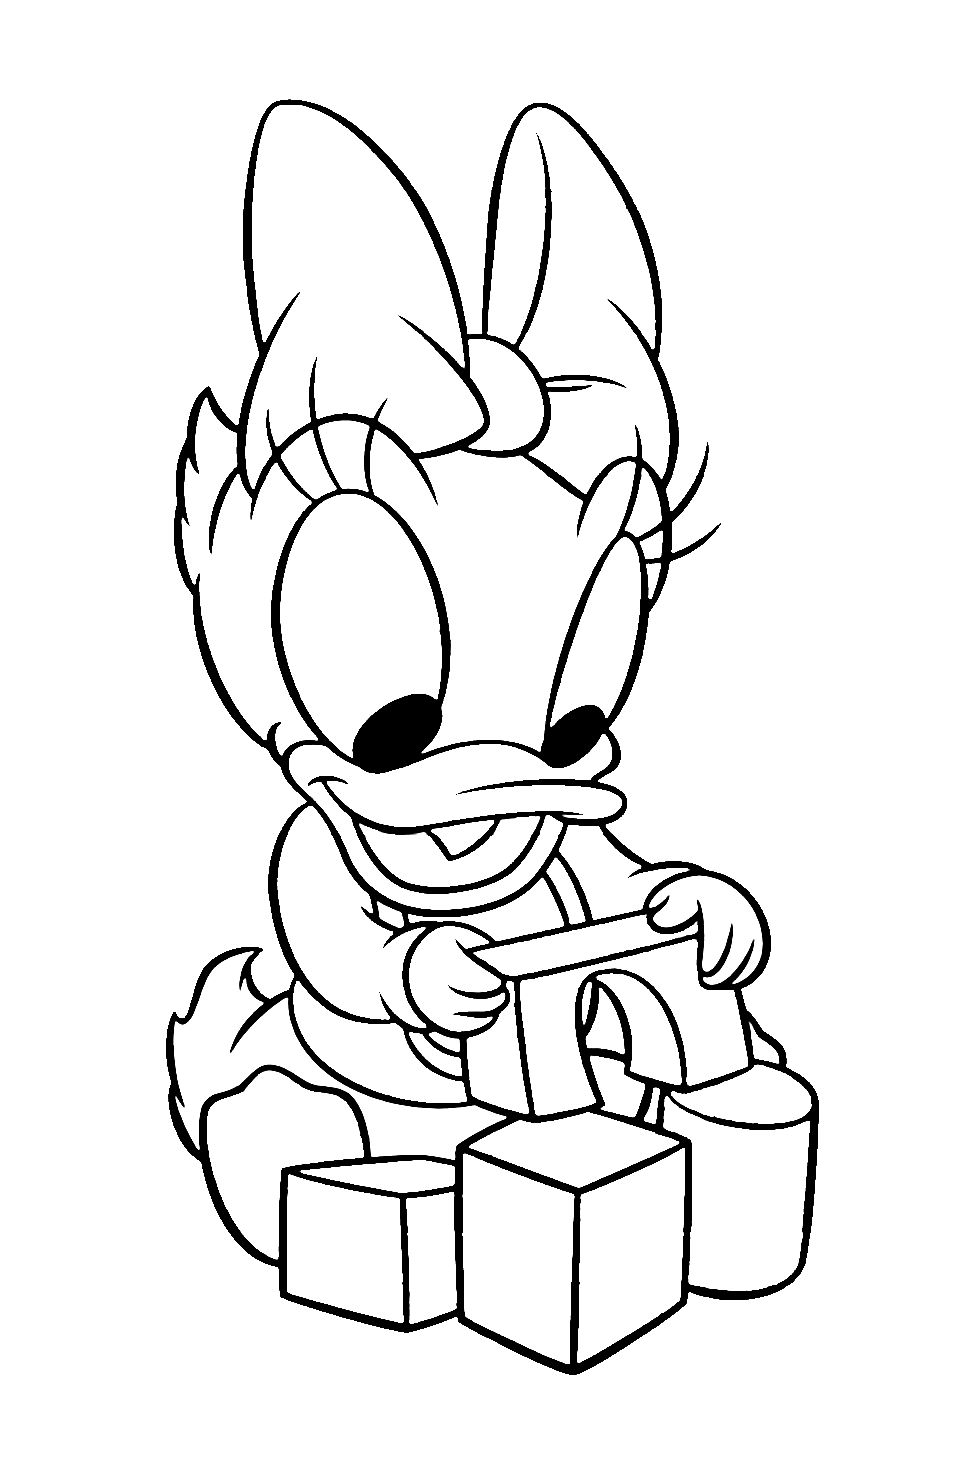 Free daisy drawing to download and color